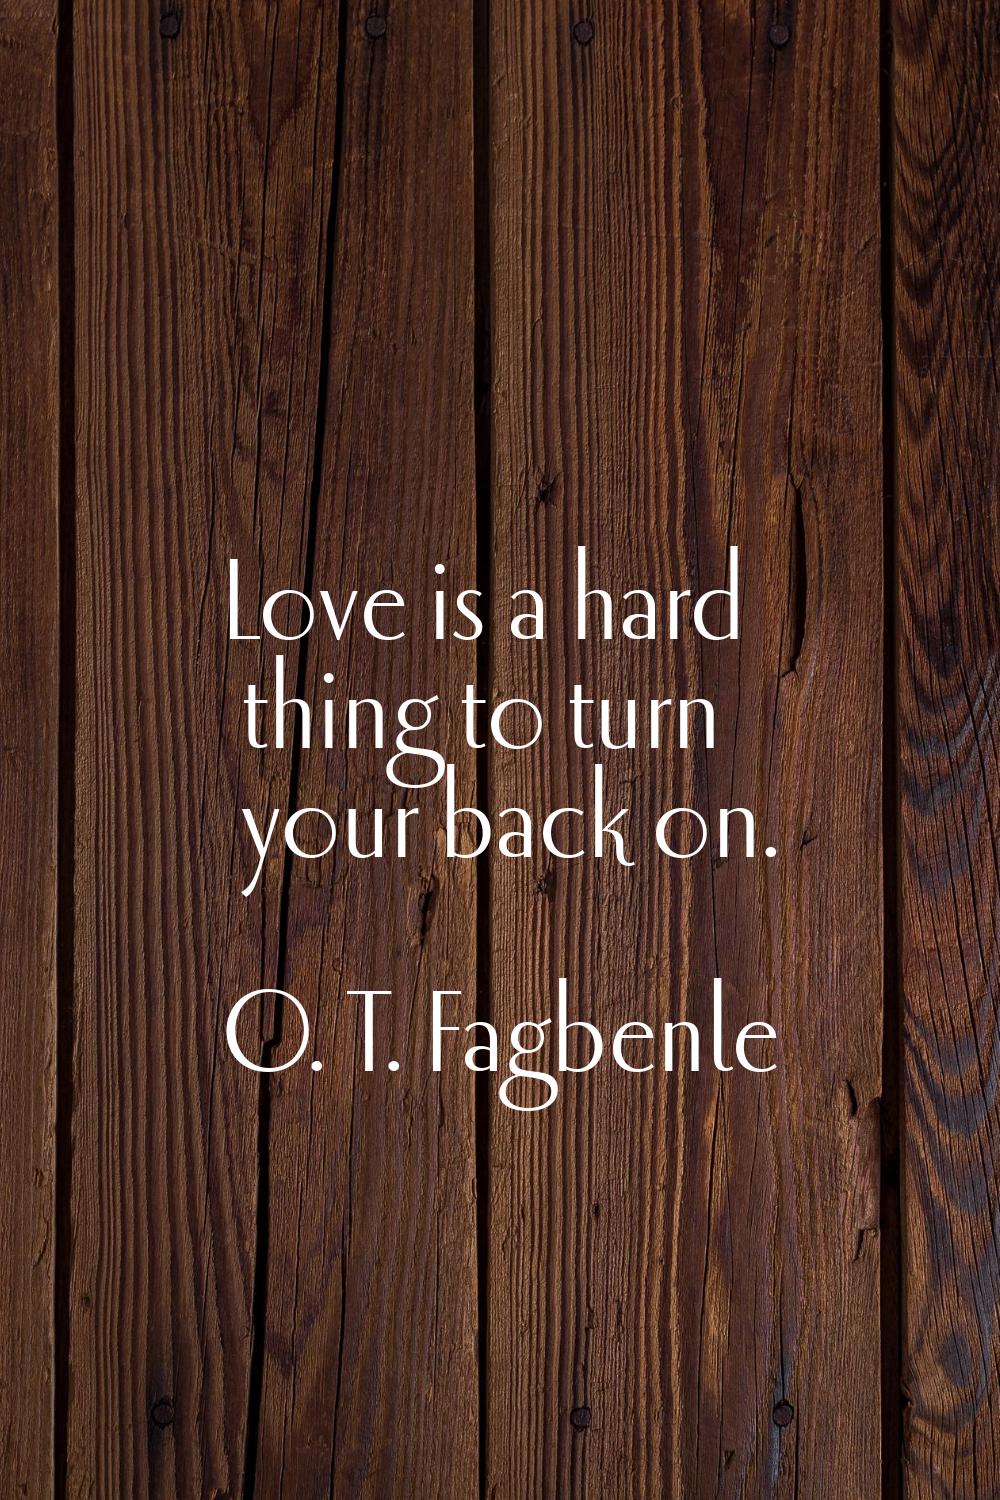 Love is a hard thing to turn your back on.